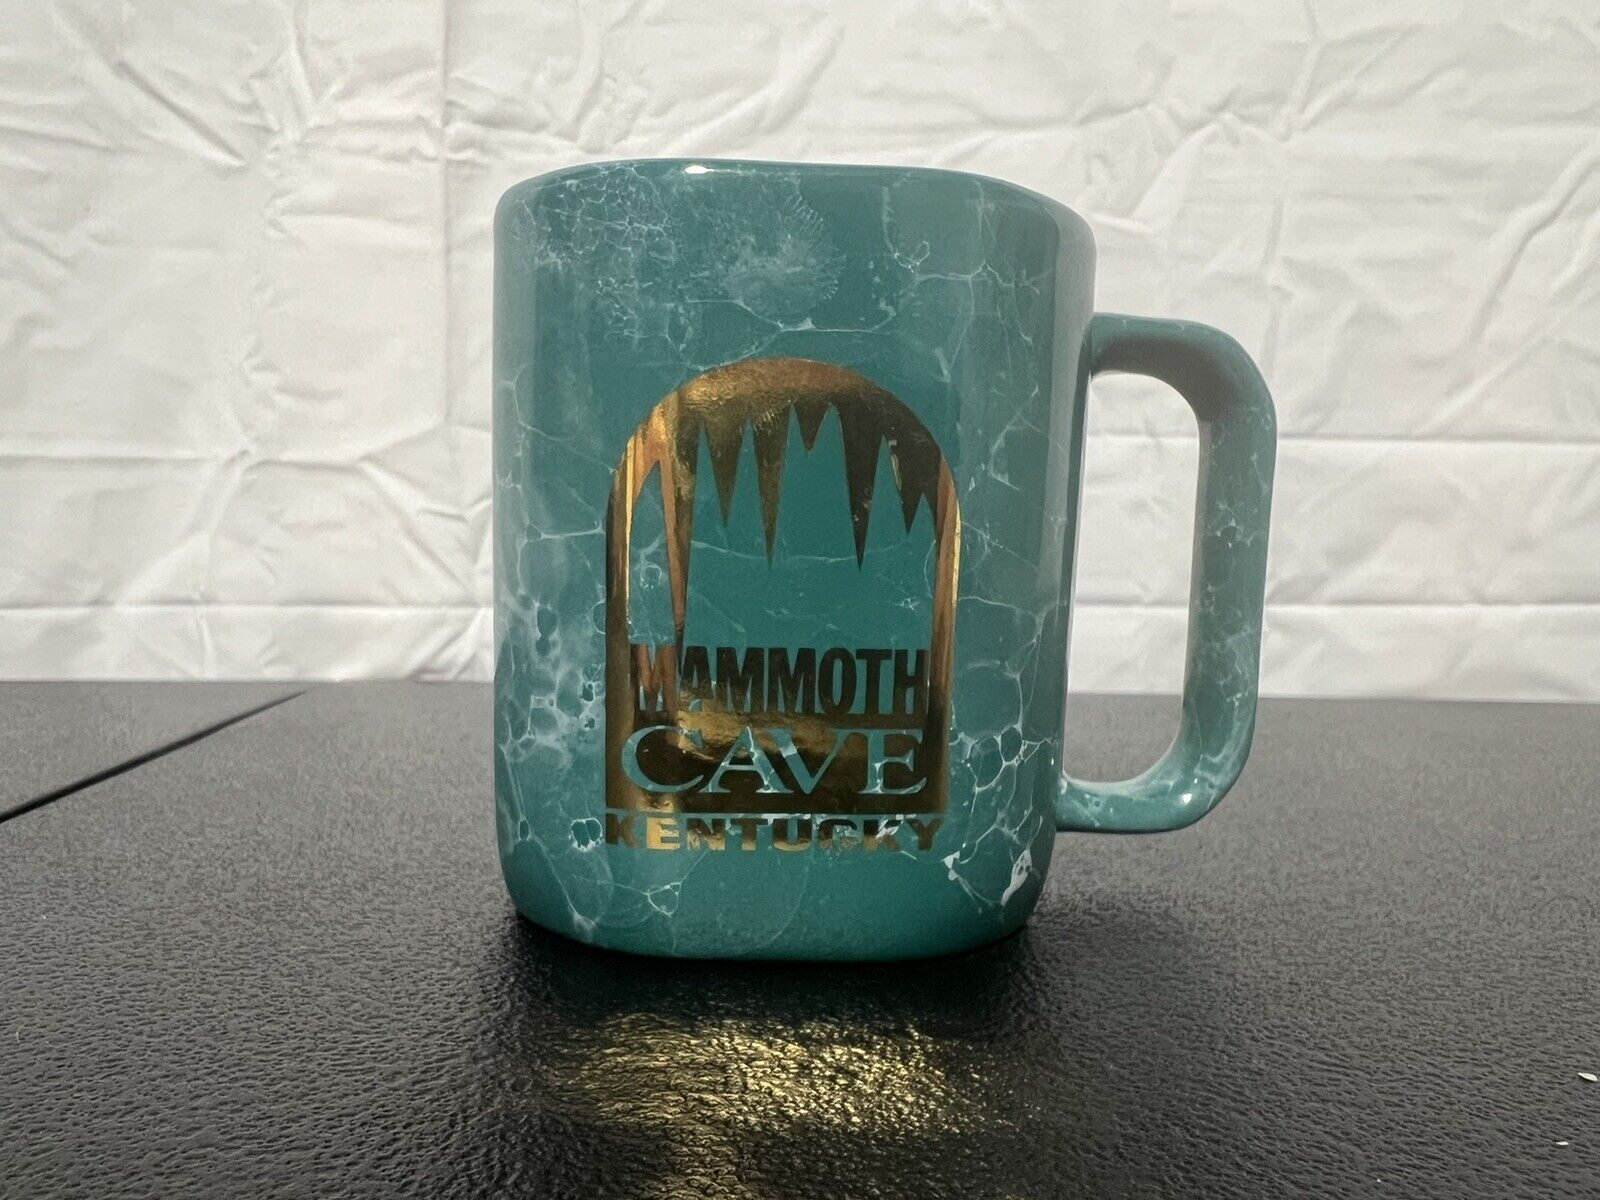 Vintage Mammoth Cave Heavy Square Mug Gold Lettering, Green/Turquoise